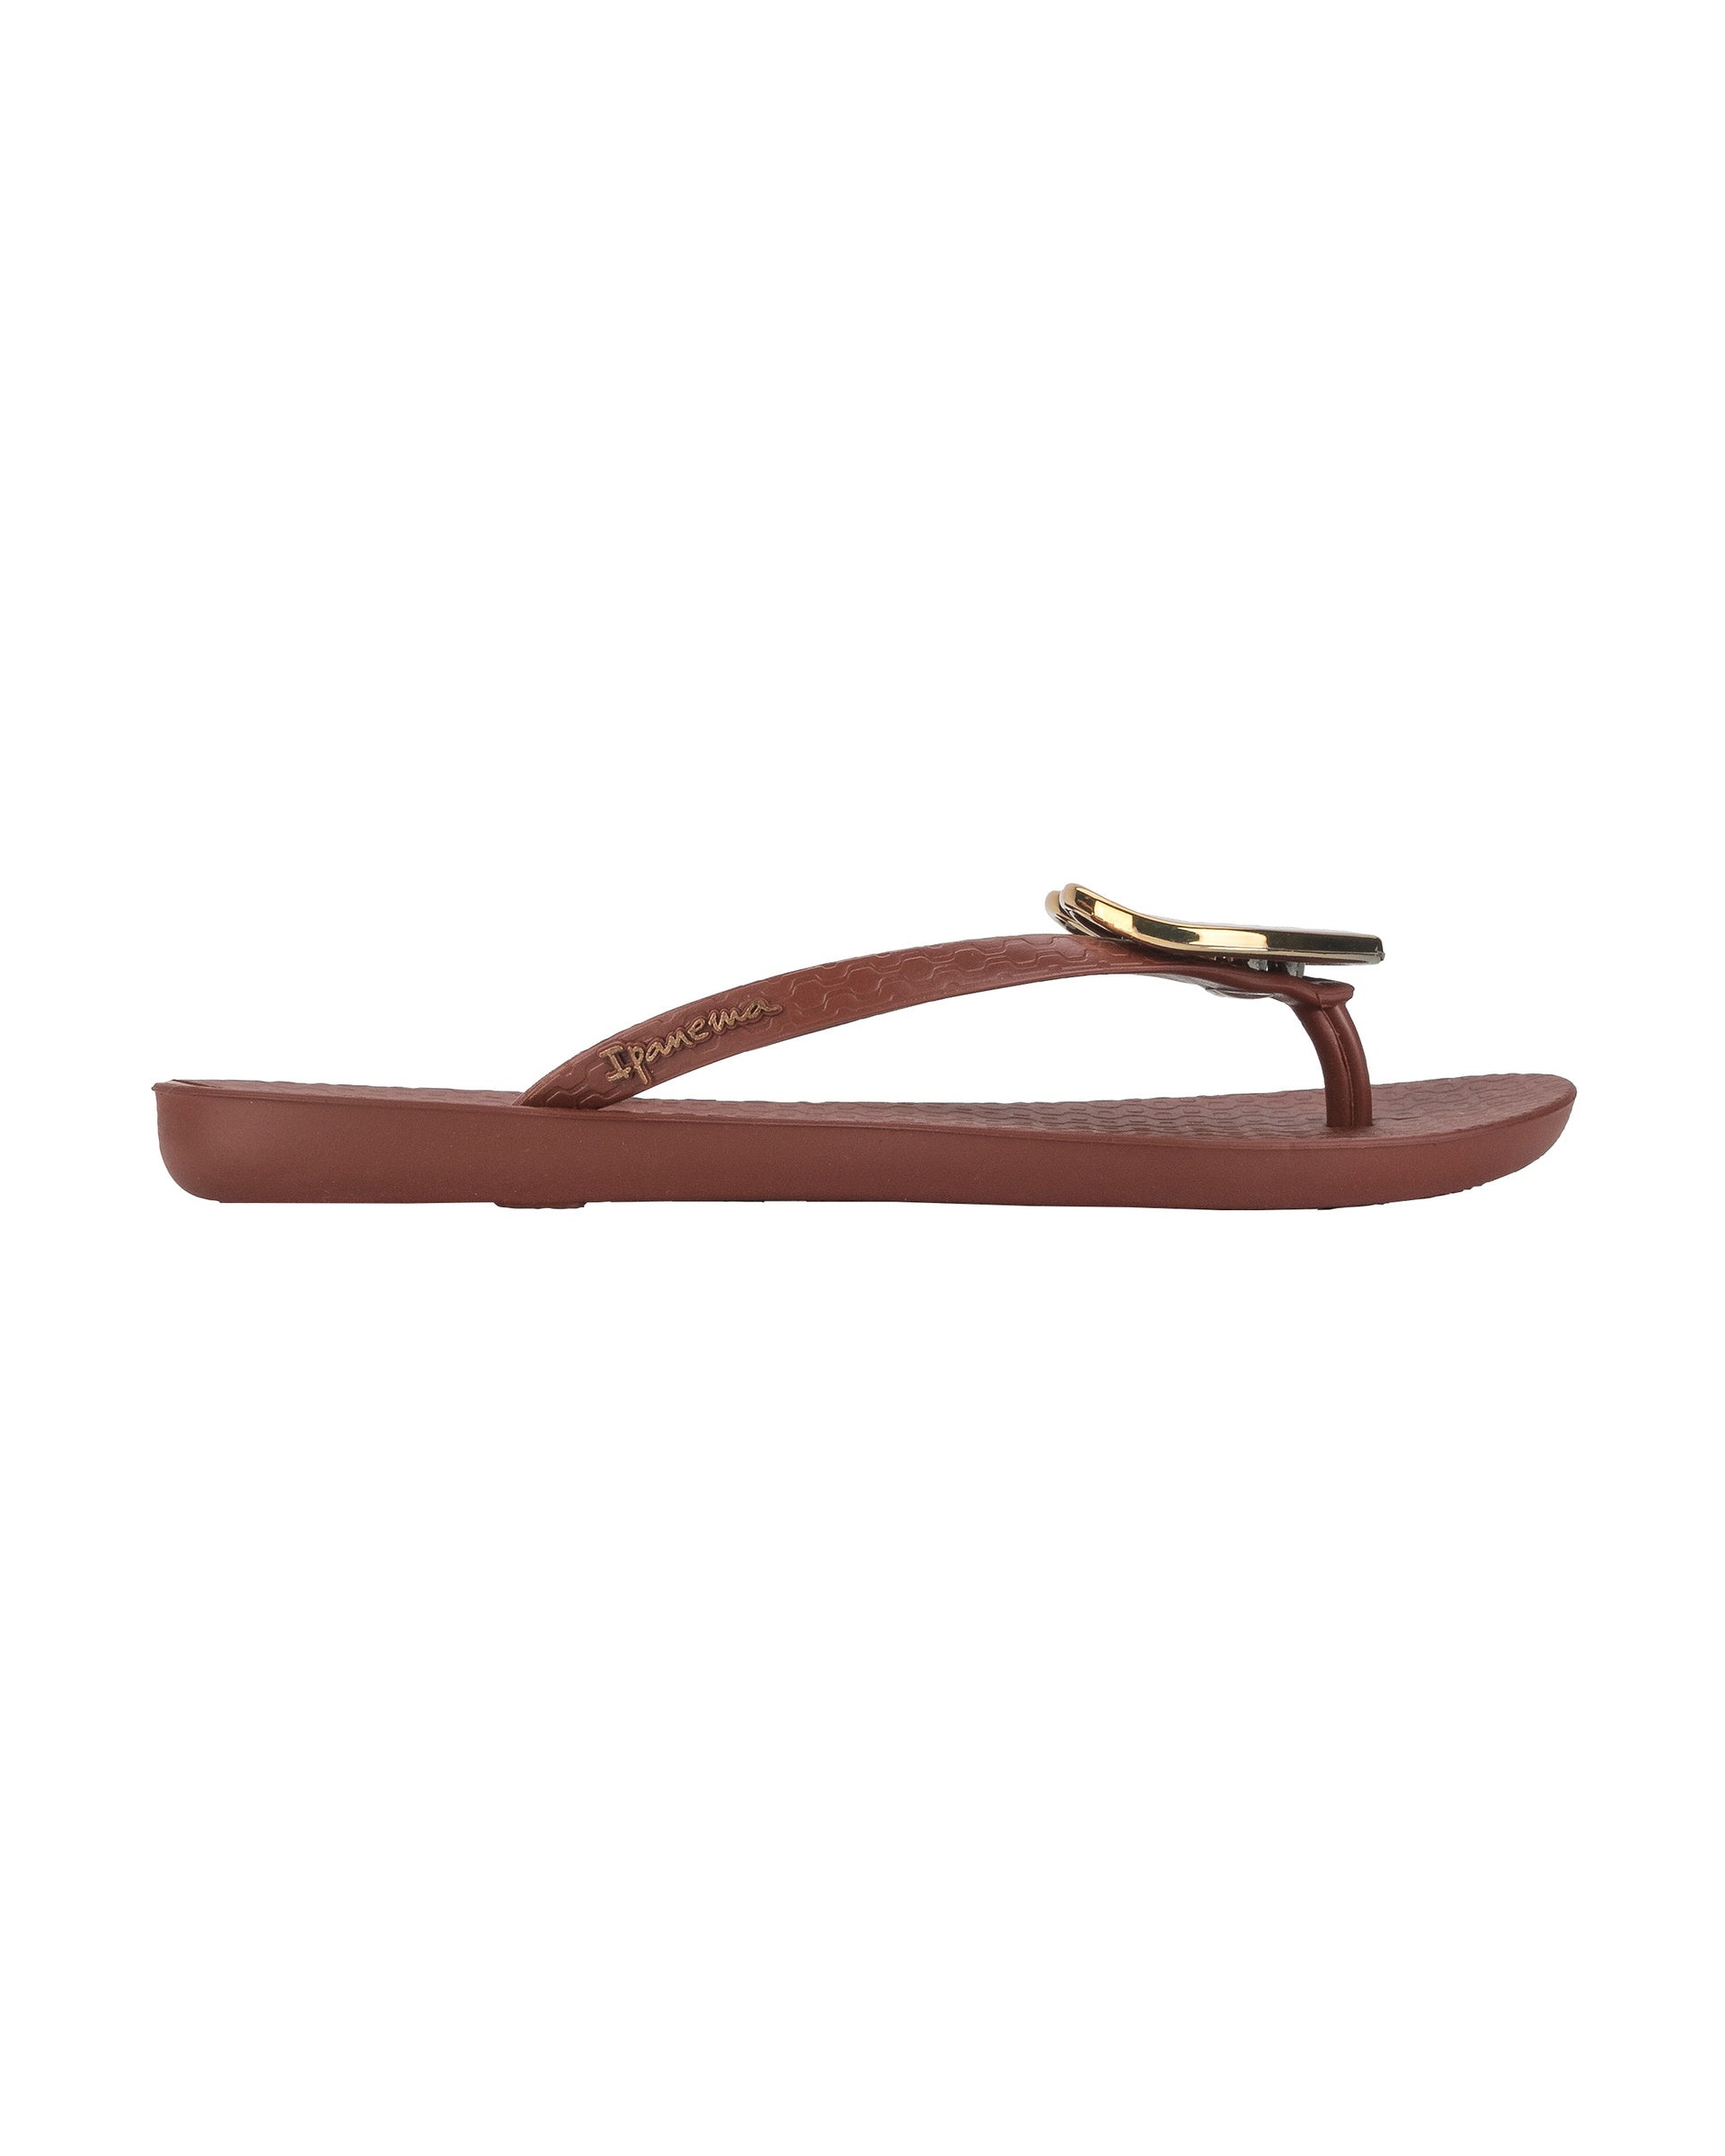 Outer side view of a brown Ipanema Wave Heart women's flip flop with gold heart.